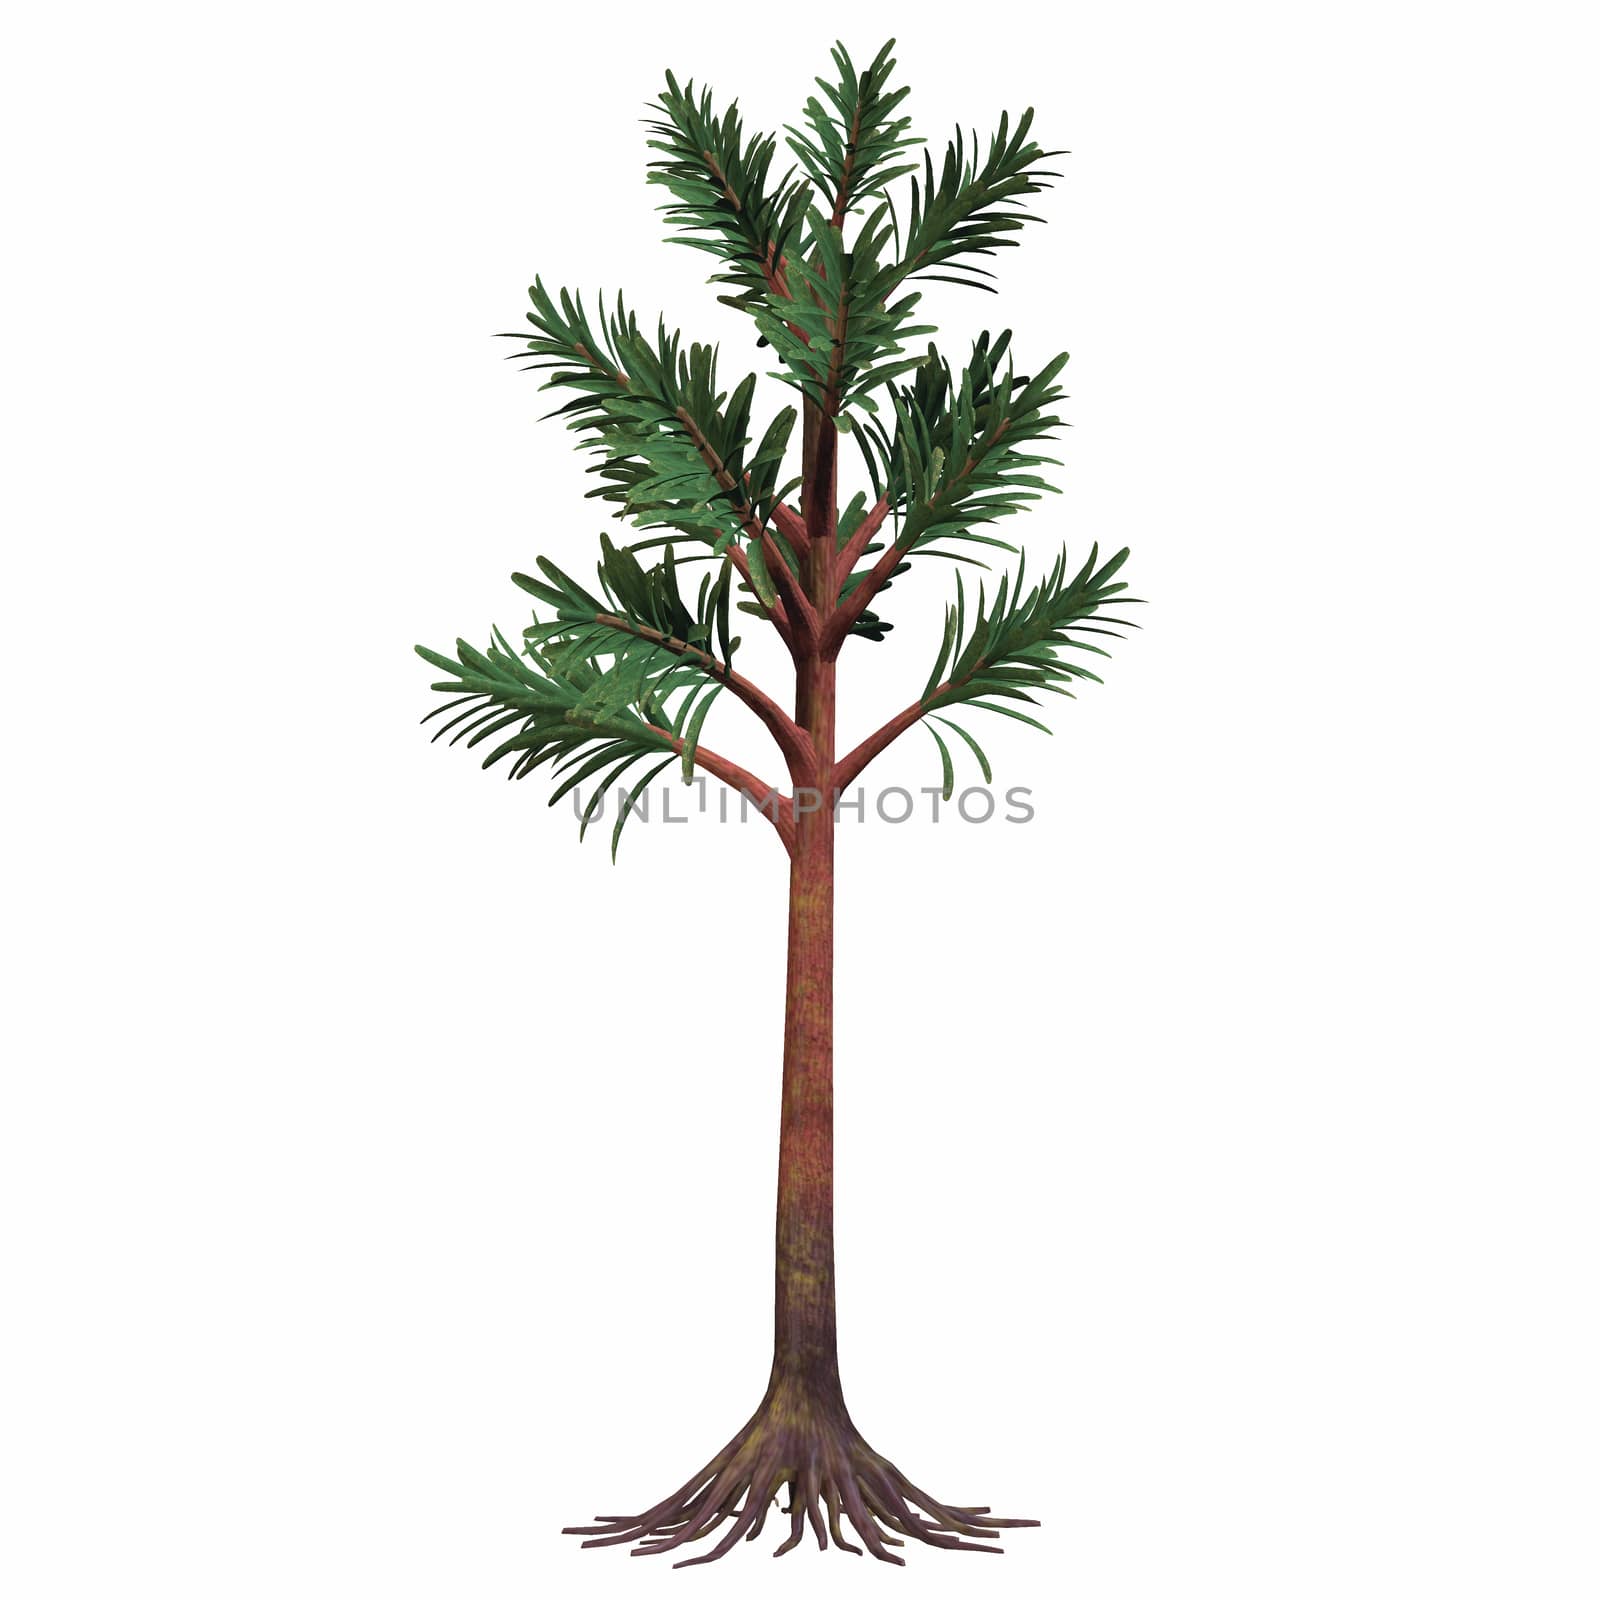 Cordaites are considered the ancestors of conifers. They were plants with an arboreal shape. They could grow very high and lived during the Permian Age.